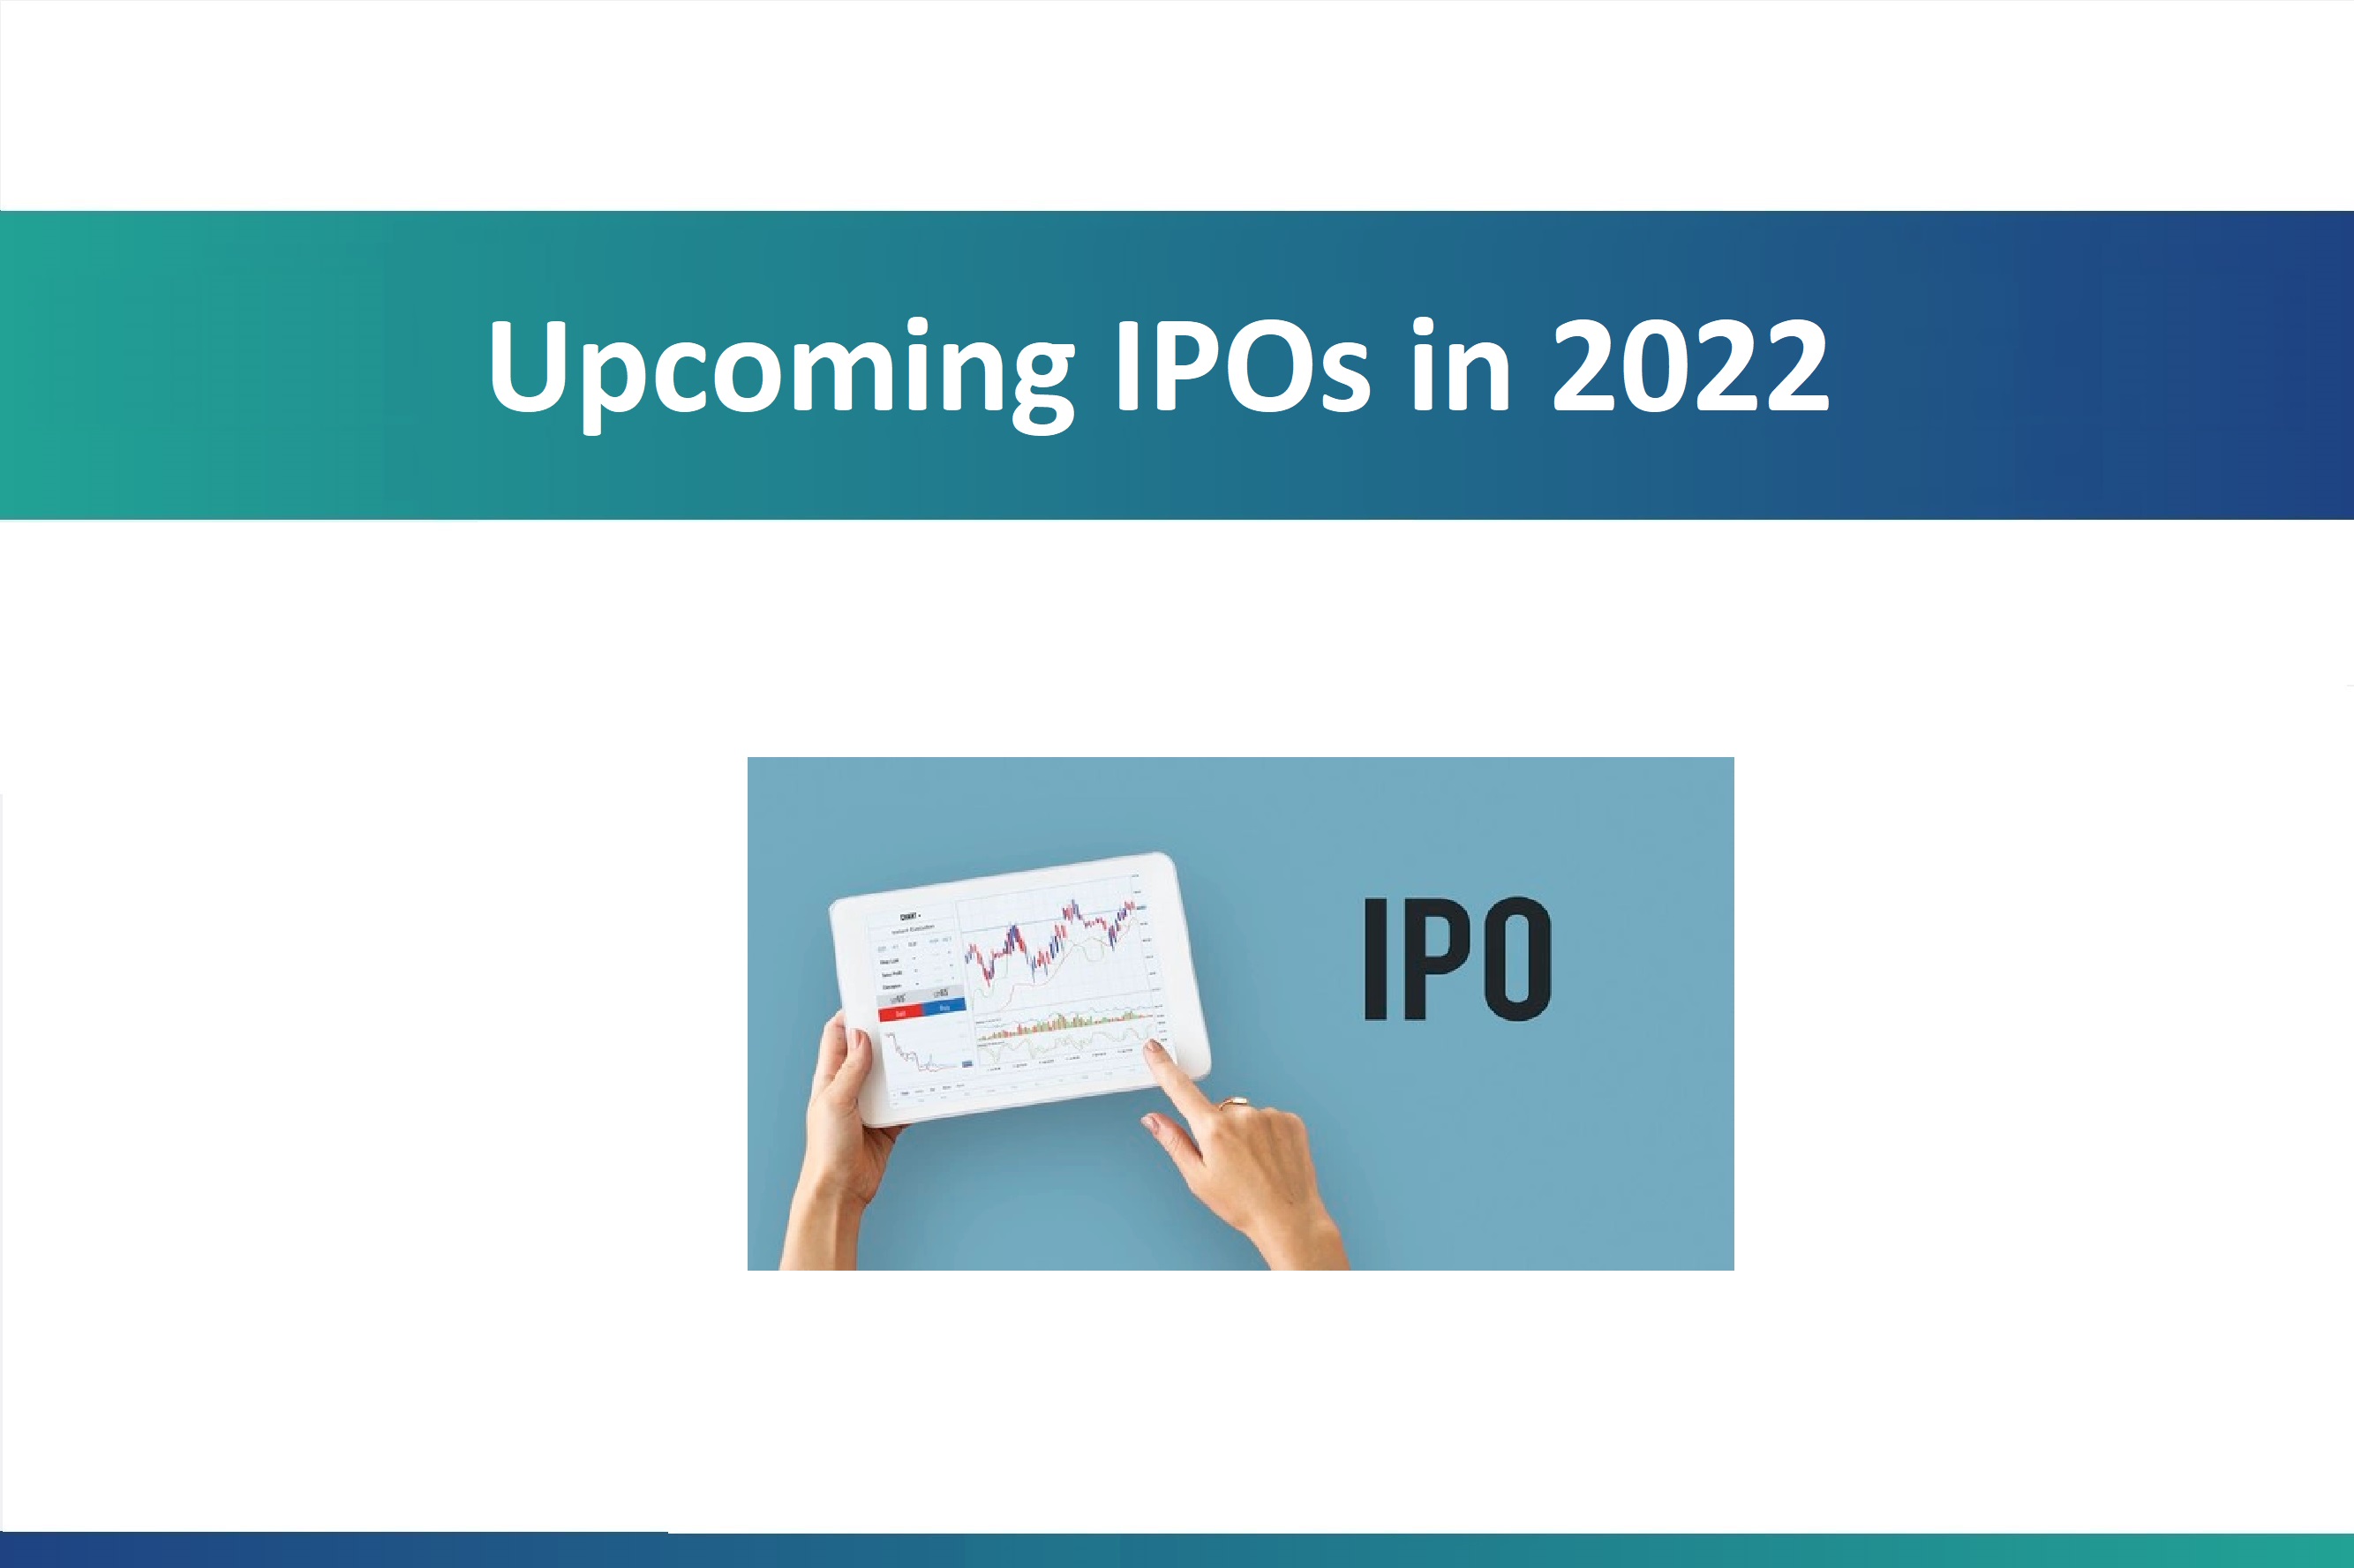 Upcoming IPOs in 2022: List of latest IPOs in 2022